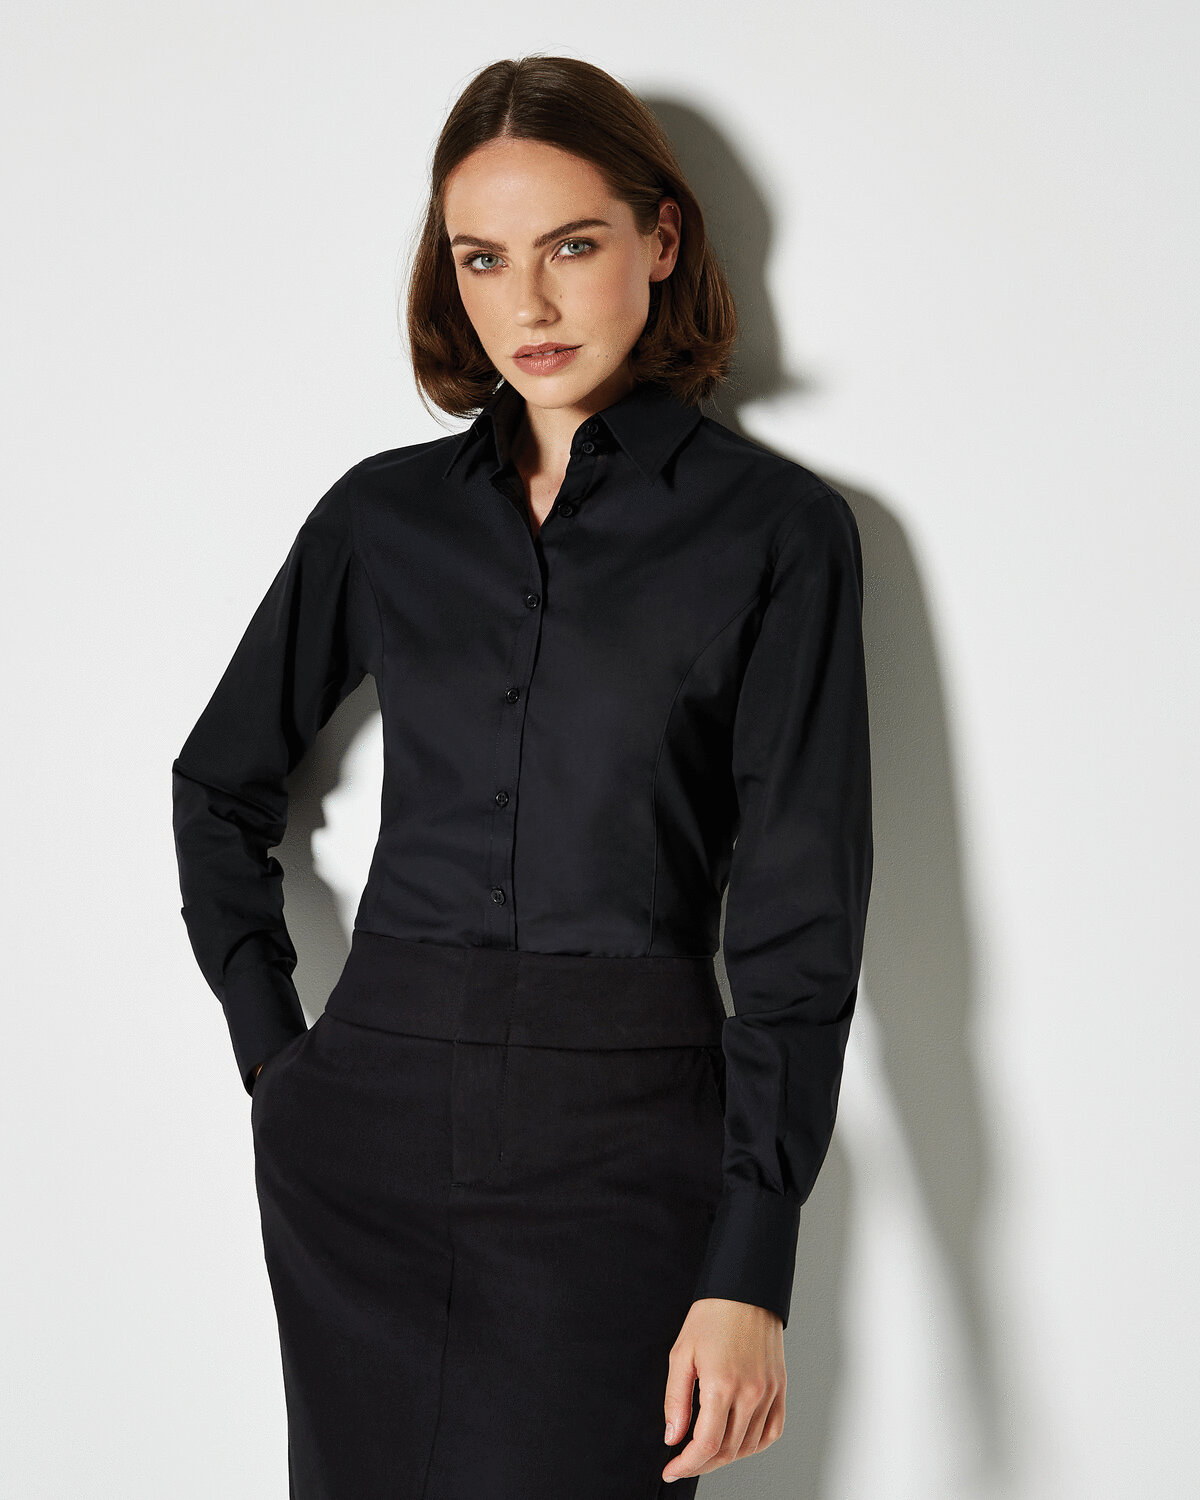 LADIES TAILORED FIT BUSINESS LONG SLEEVE SHIRT